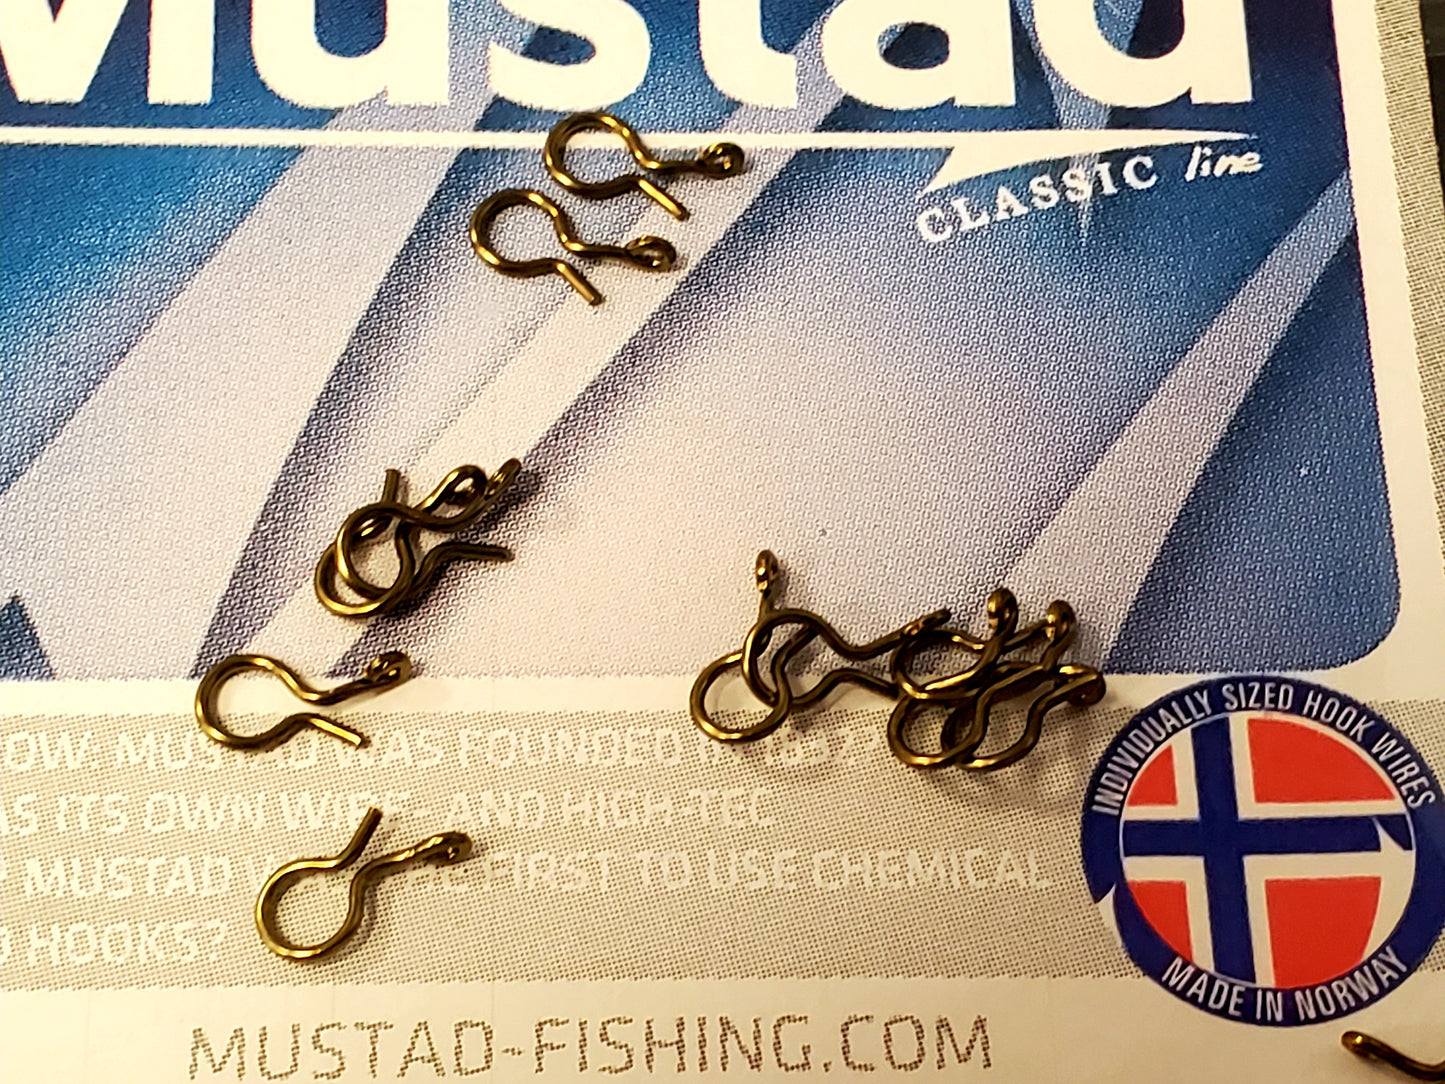 Mustad Snap Hooks - 77145-BR - 2 sizes – Baxter House River Outfitters